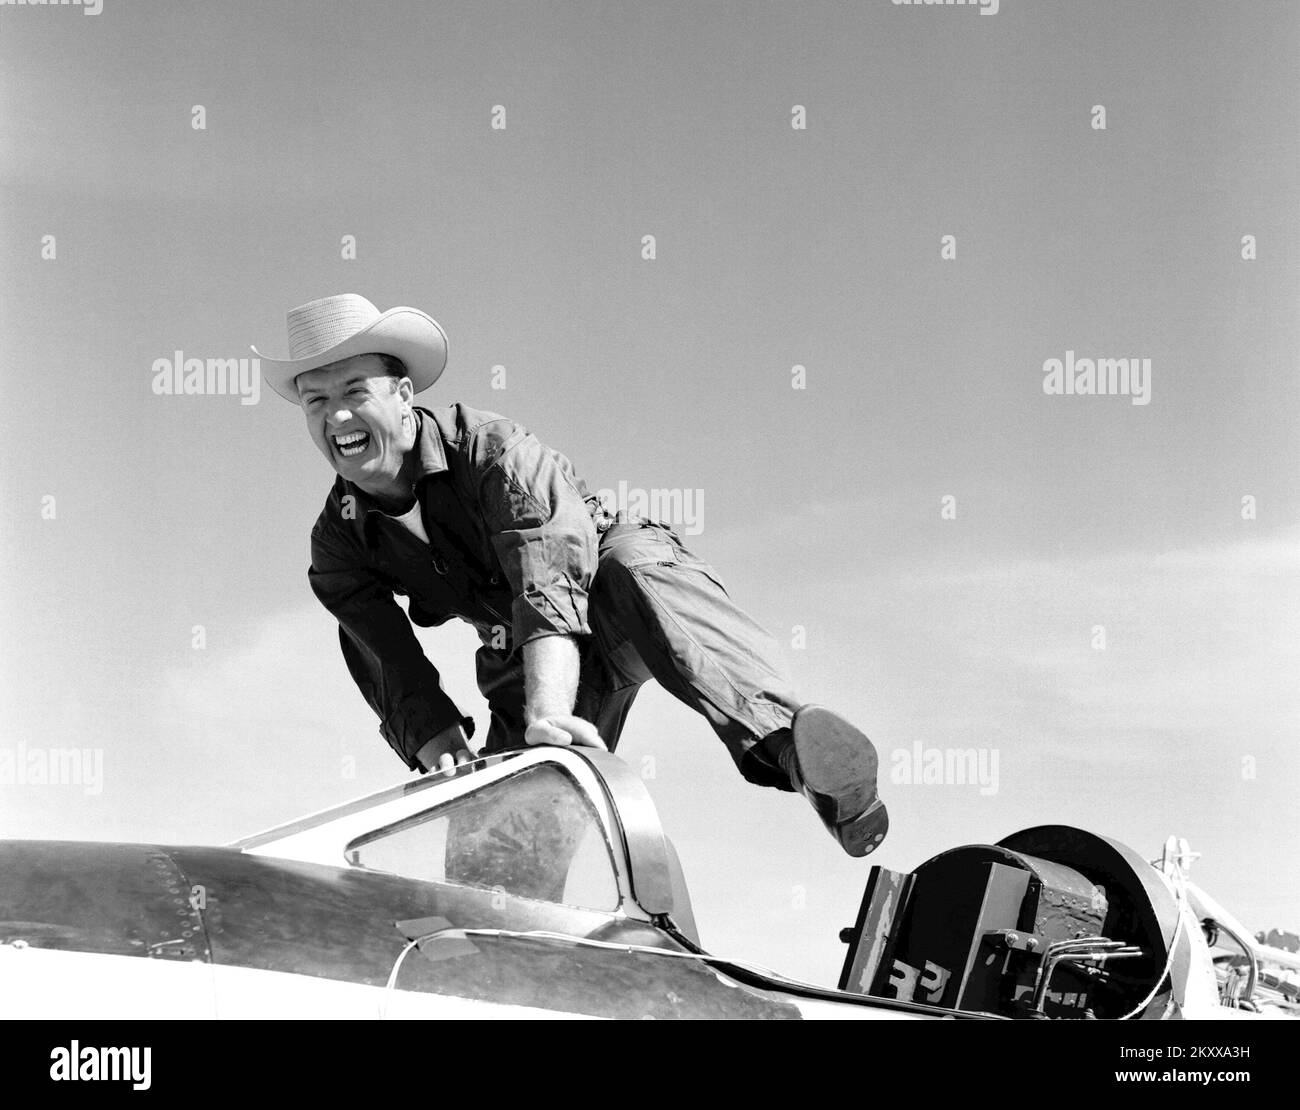 Cowboy Joe (NACA High-Speed Flight Station test pilot Joseph Walker) and his steed (Bell Aircraft Corporation X-1A). A happy Joe was photographed in 1955 at Edwards, California. The X-1A was flown six times by Bell Aircraft Company pilot Jean 'Skip' Ziegler in 1953. Air Force test pilots Major Charles 'Chuck' Yeager and Major Arthur 'Kit' Murray made 18 flights between November 21, 1953 and August 26, 1954. The X-1A was then turned over to the NACA. Joe Walker piloted the first NACA flight on July 20, 1955. Walker attemped a second flight on August 8, 1955 Stock Photo